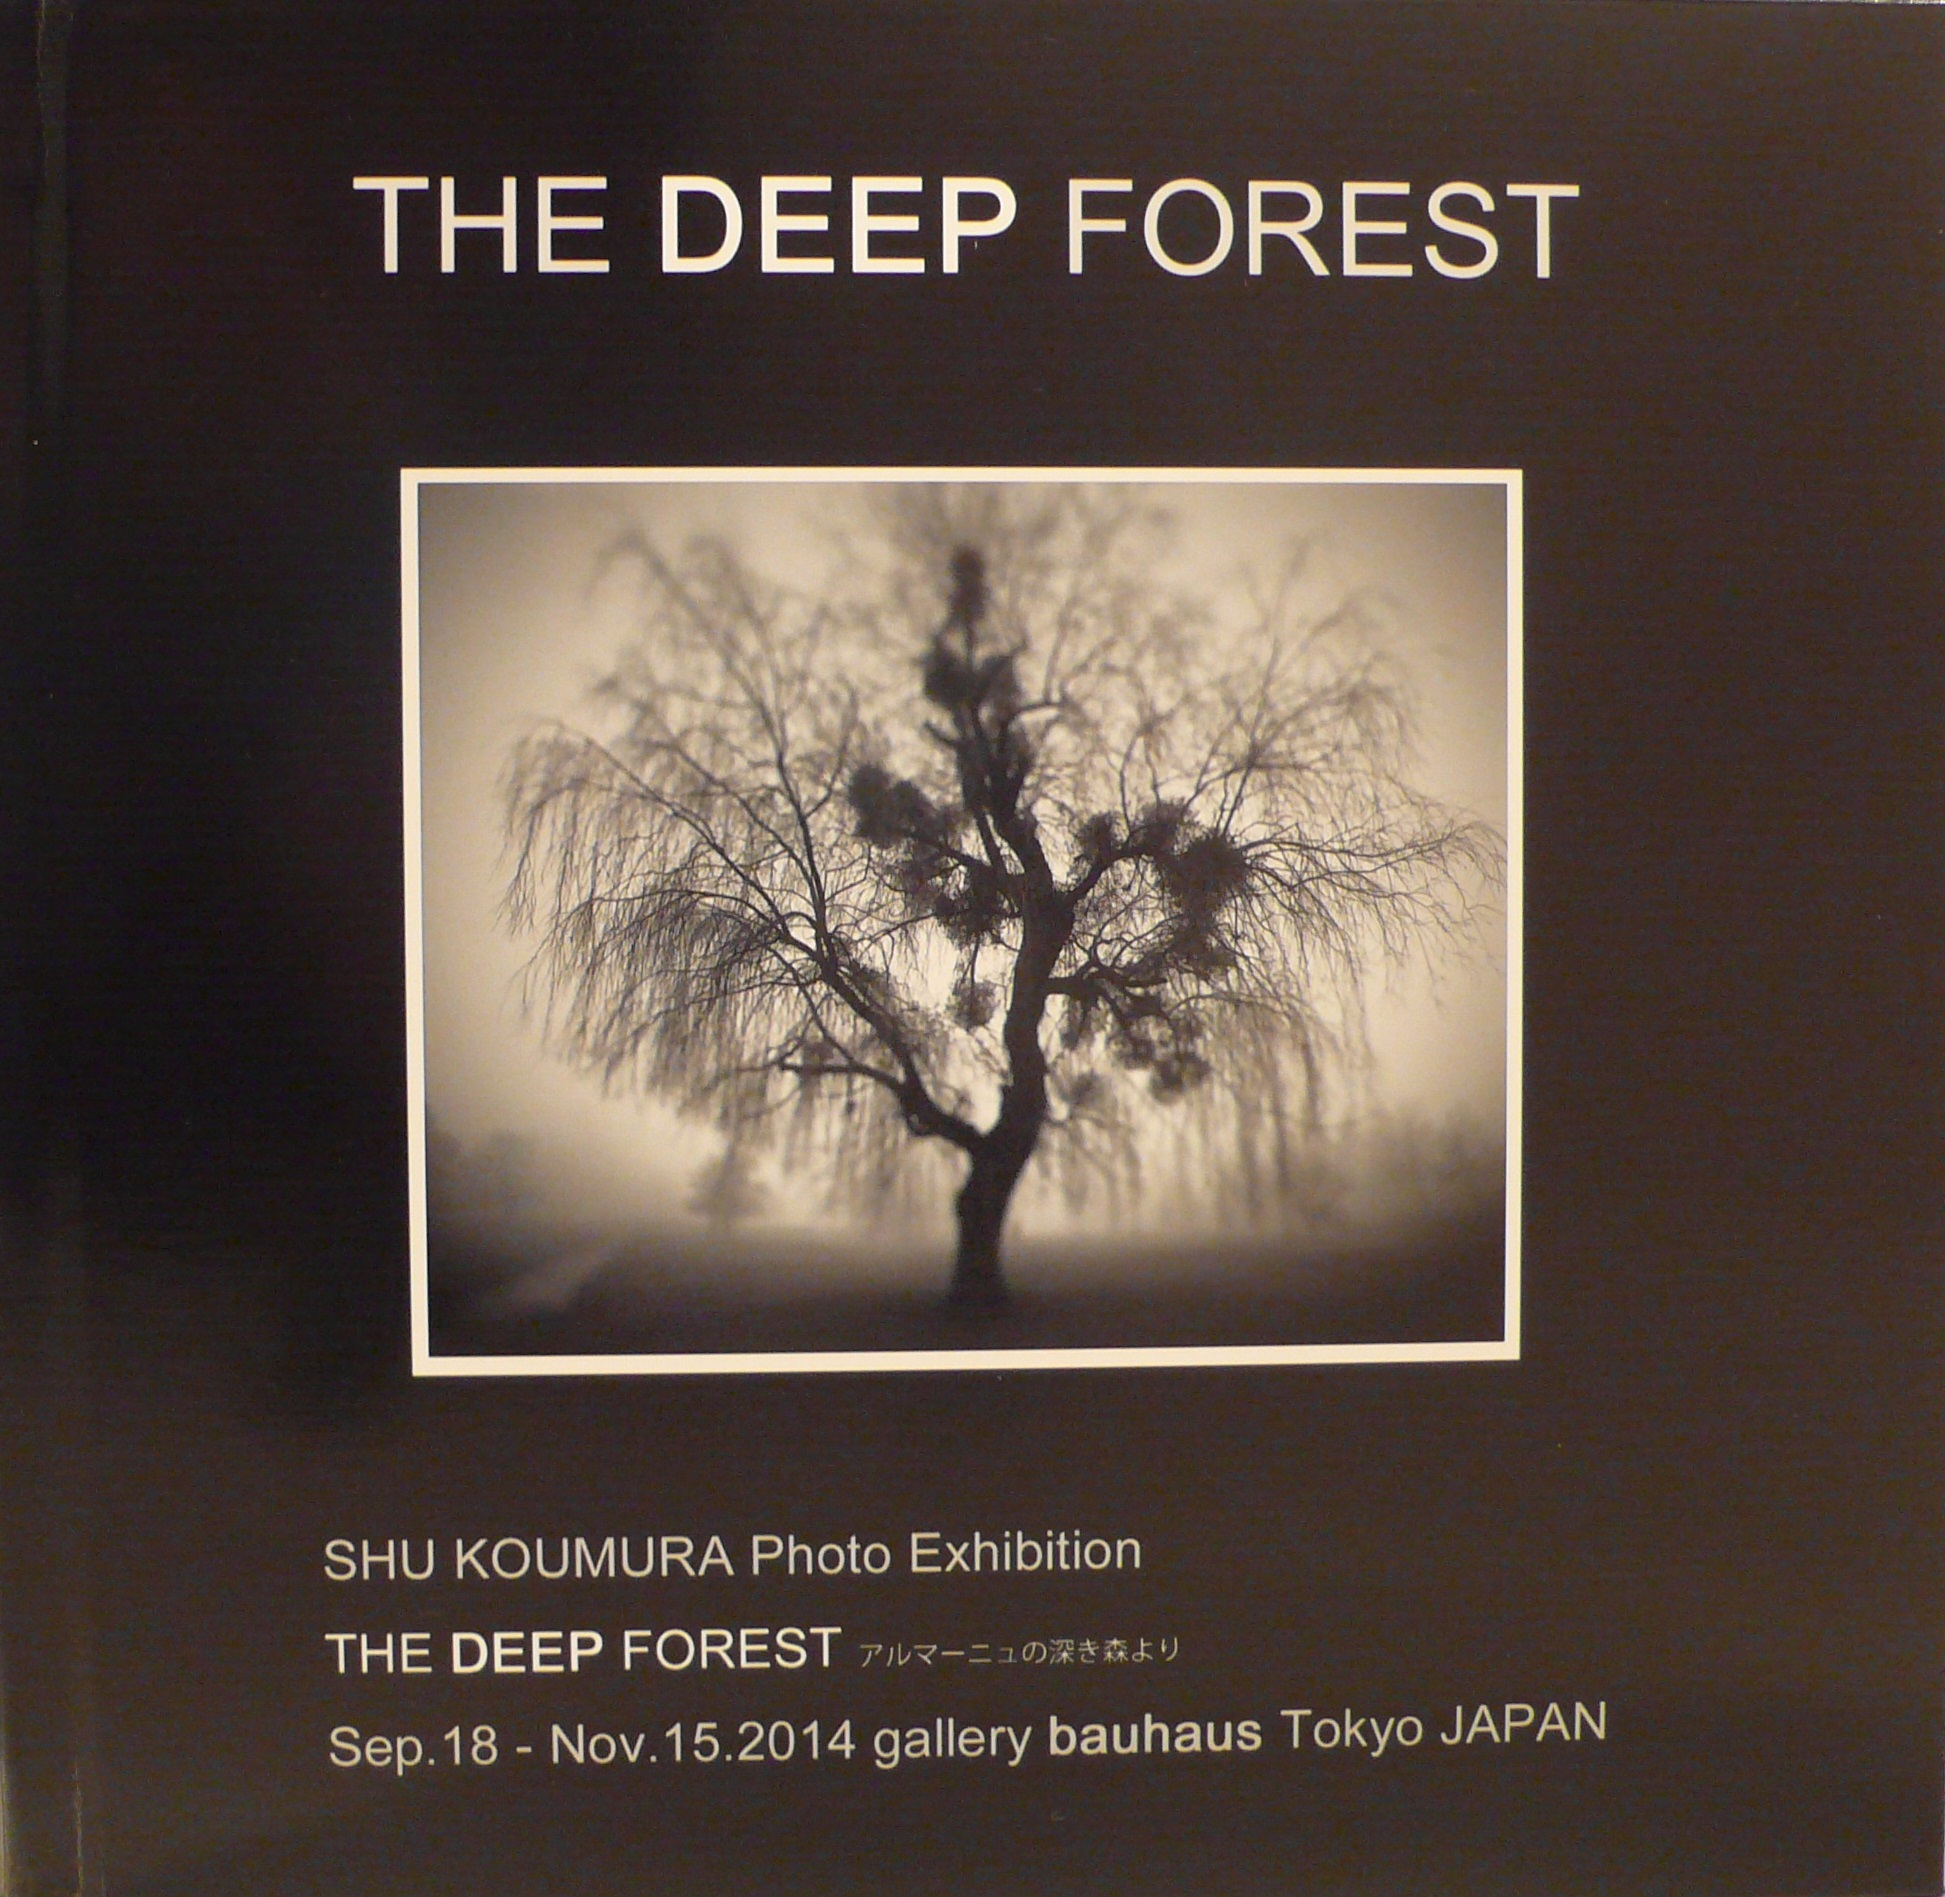 THE DEEP FOREST